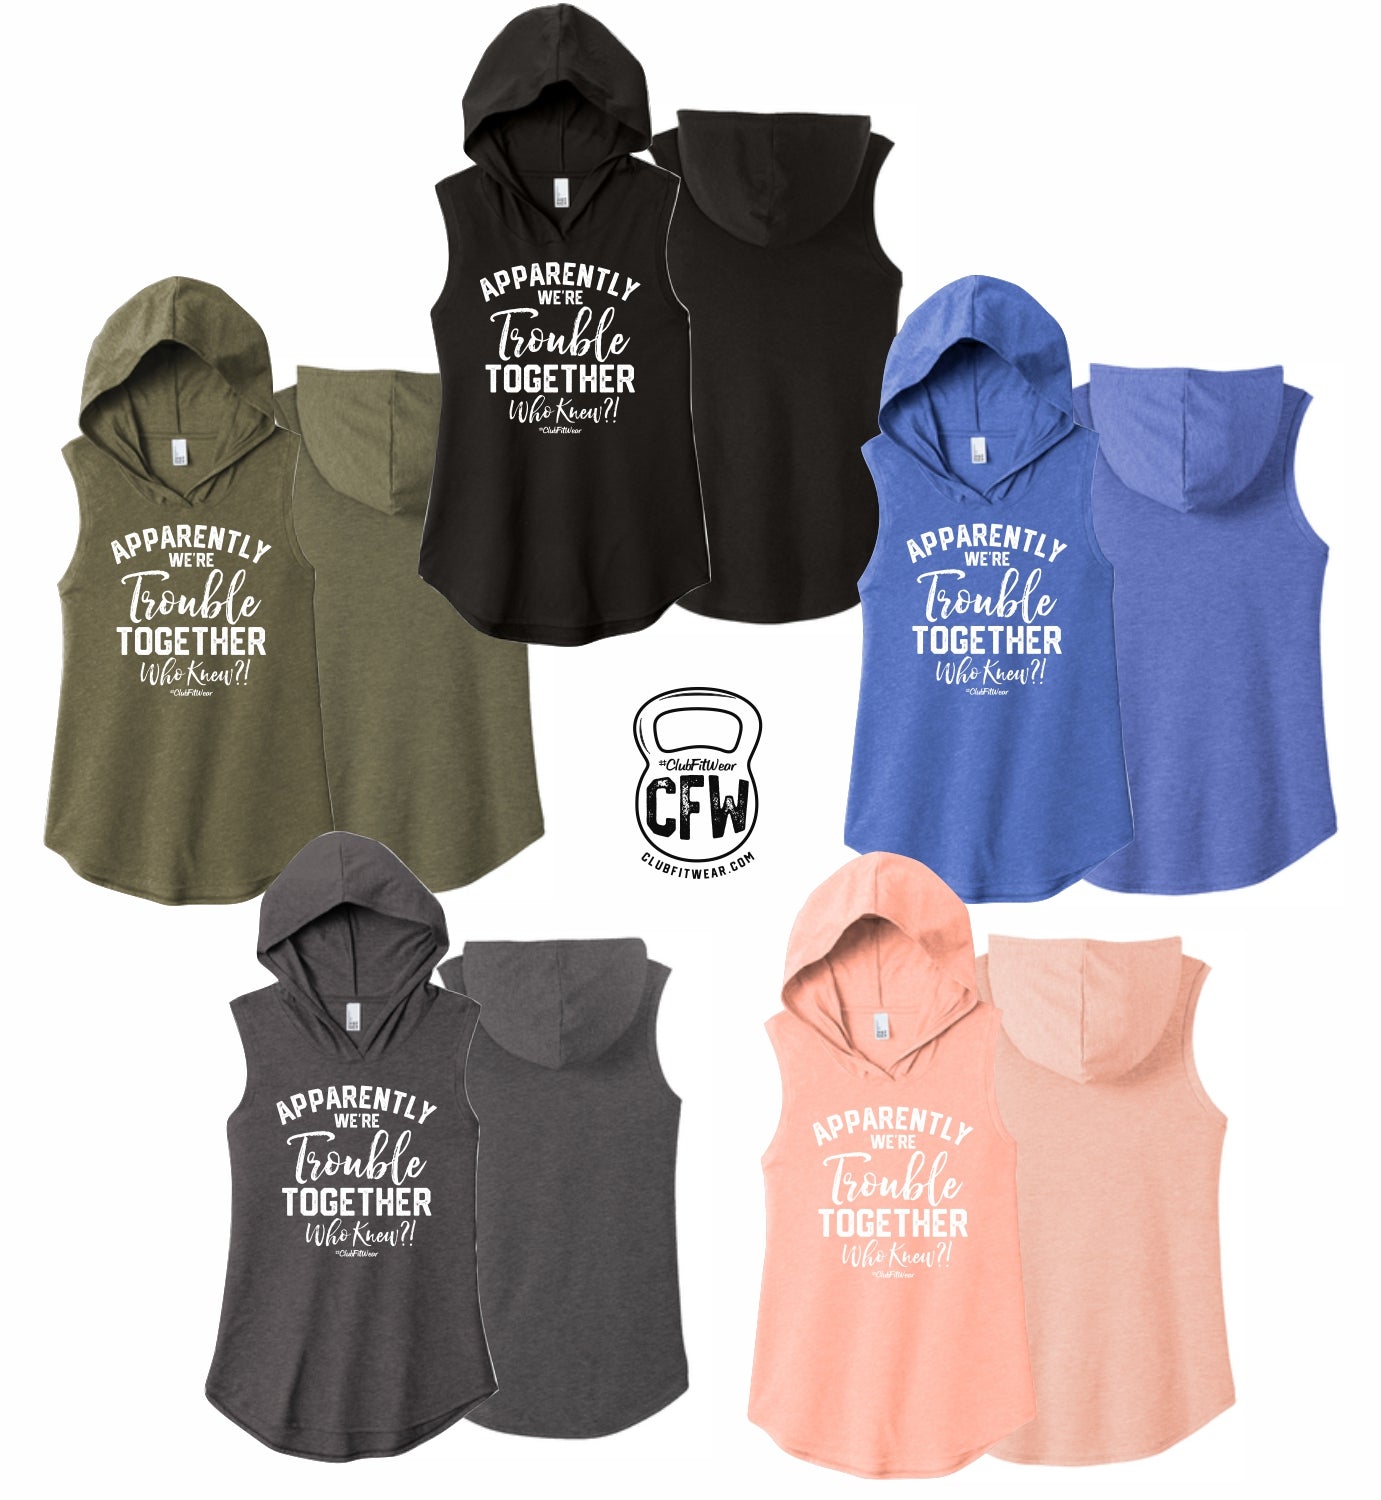 Apparently we're Trouble Together Who Knew?! - Sleeveless Hoodie